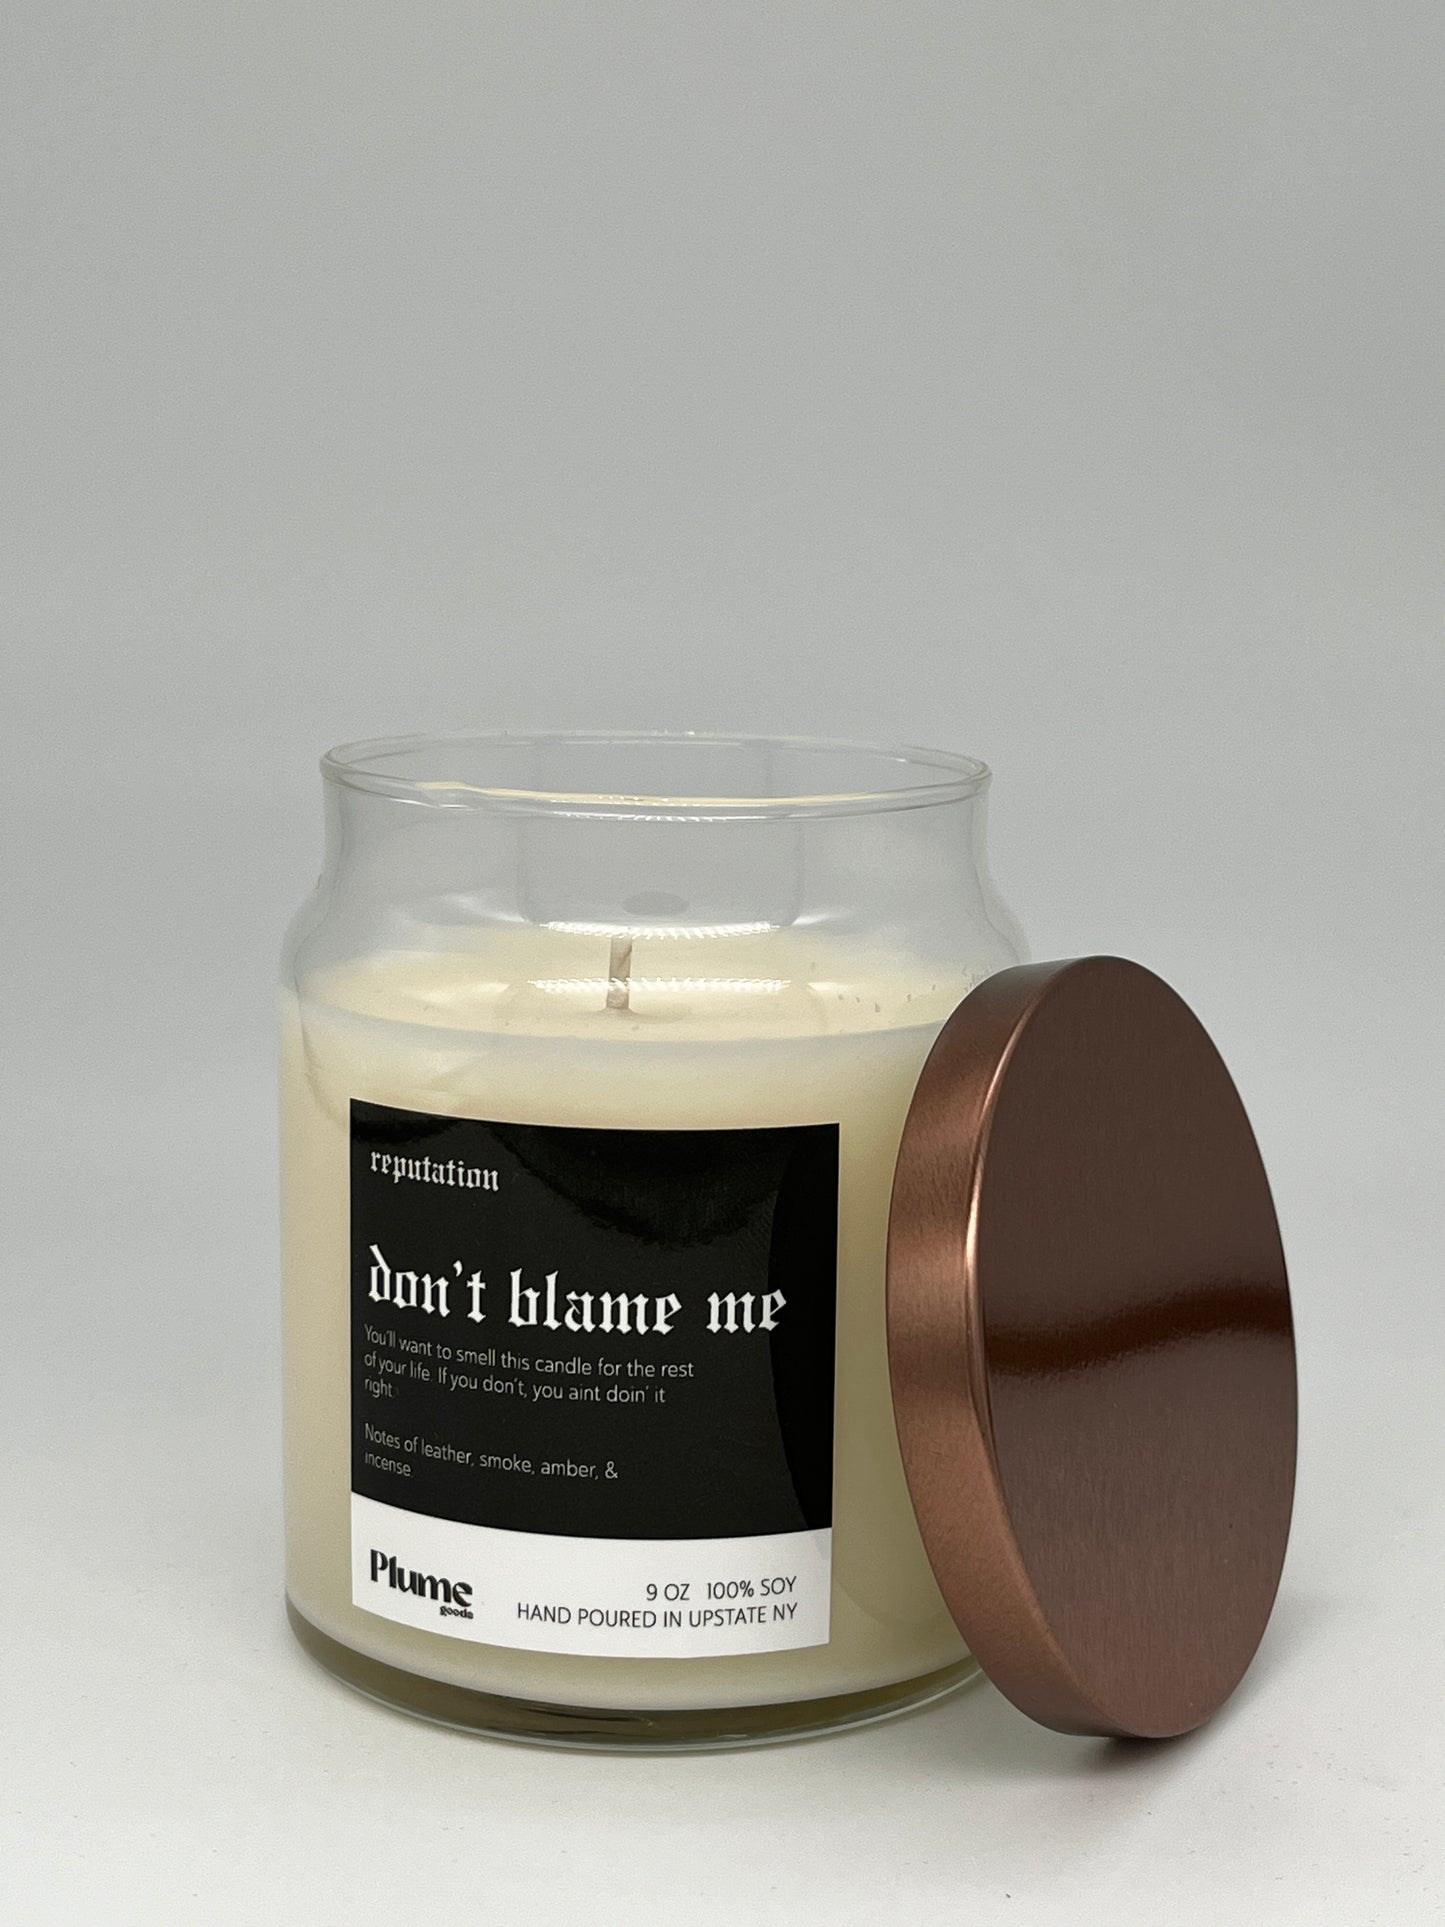 Taylor Eras - Don’t Blame Me Scented Soy Candle